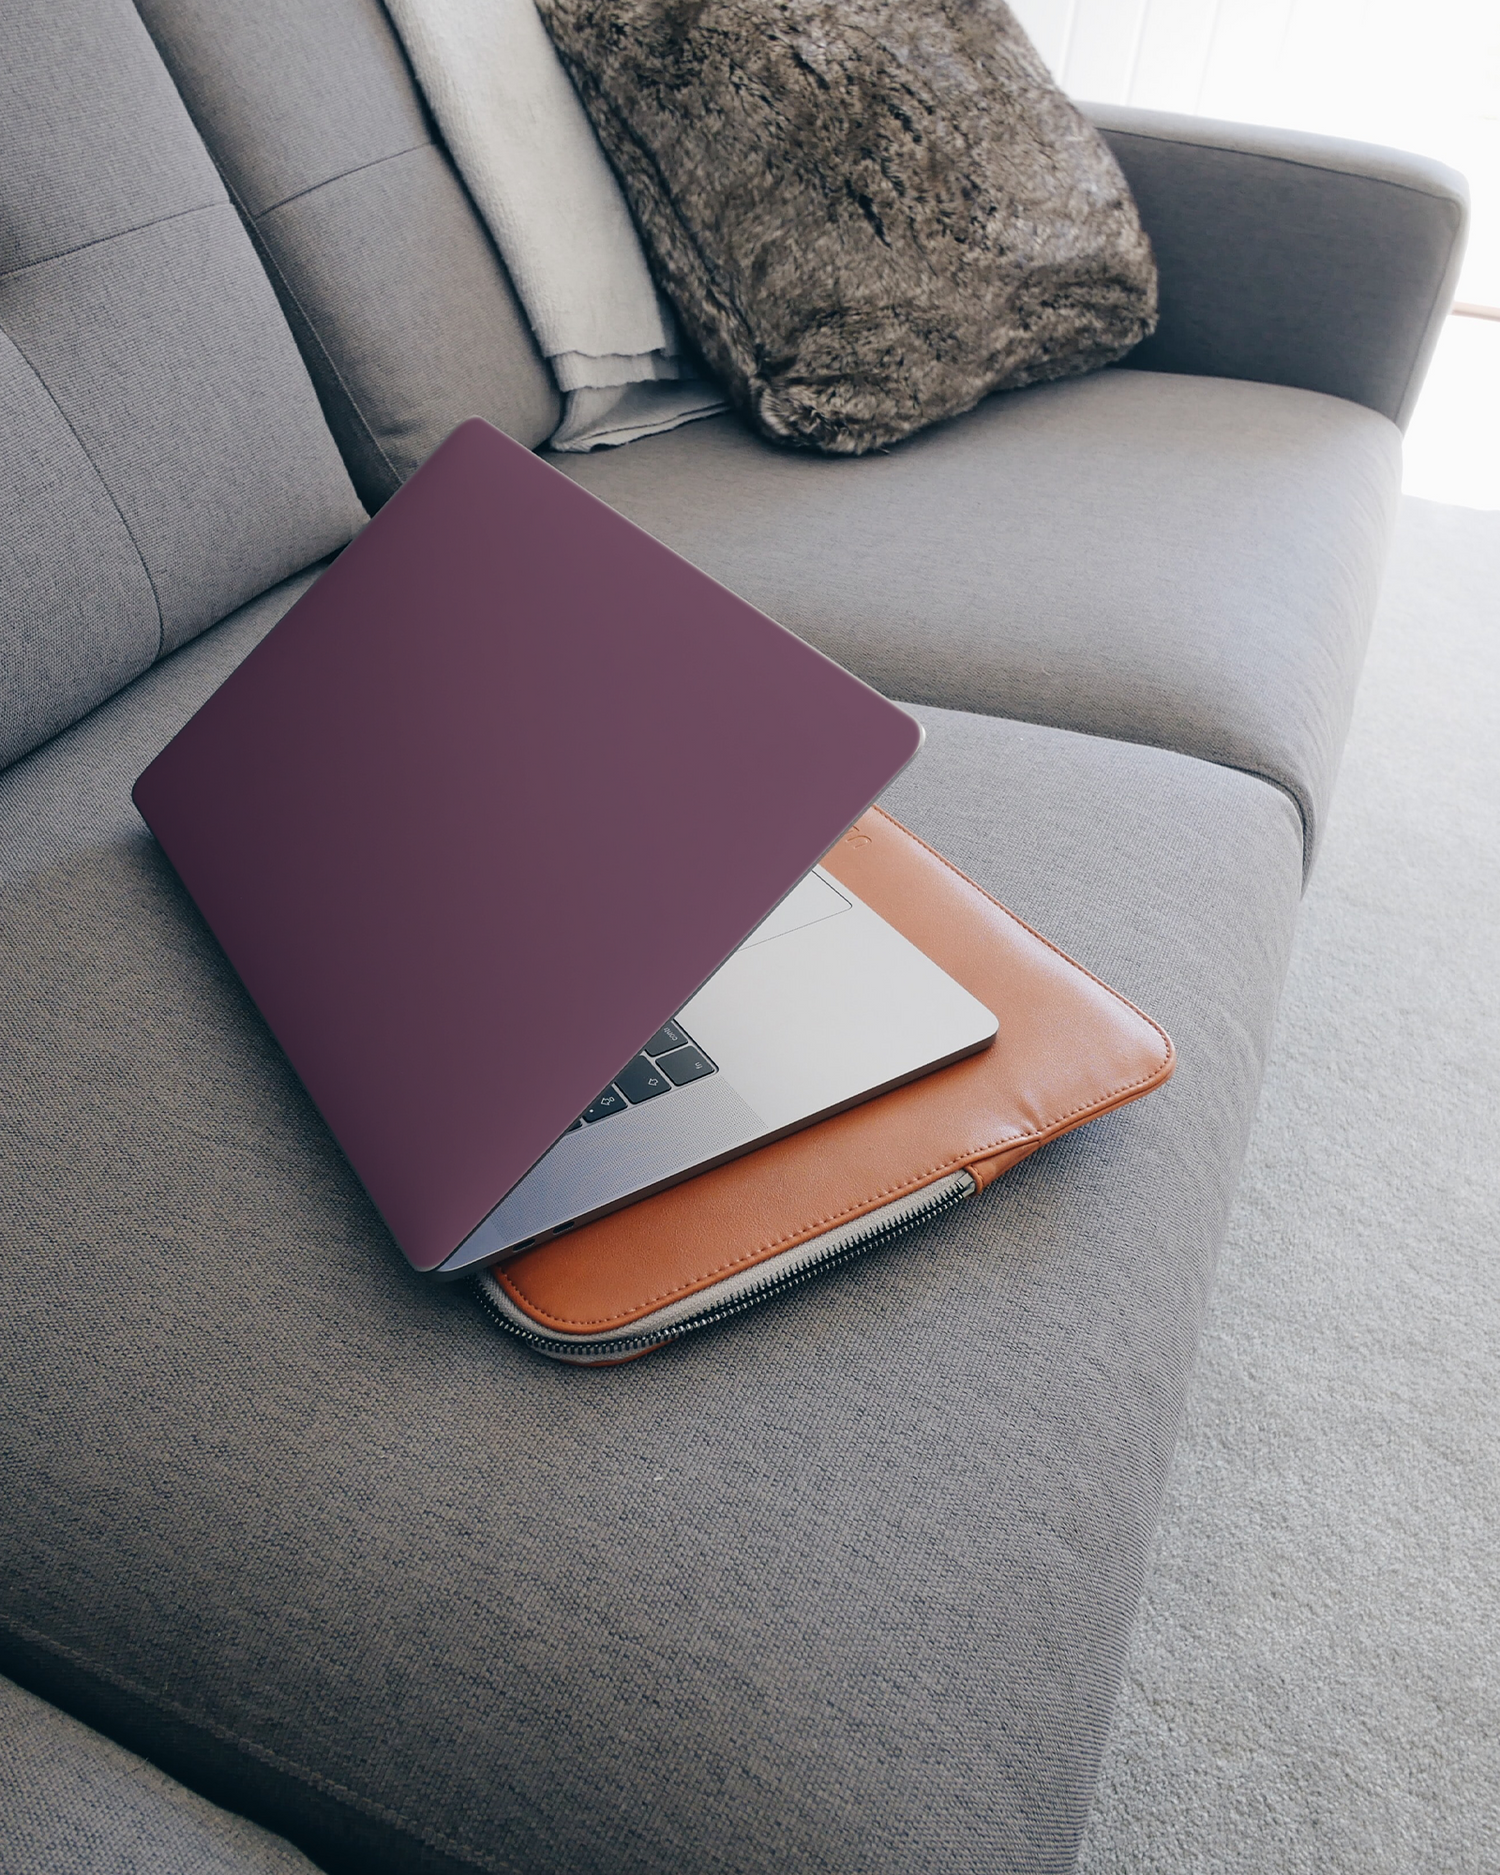 PLUM Laptop Skin for 15 inch Apple MacBooks on a couch